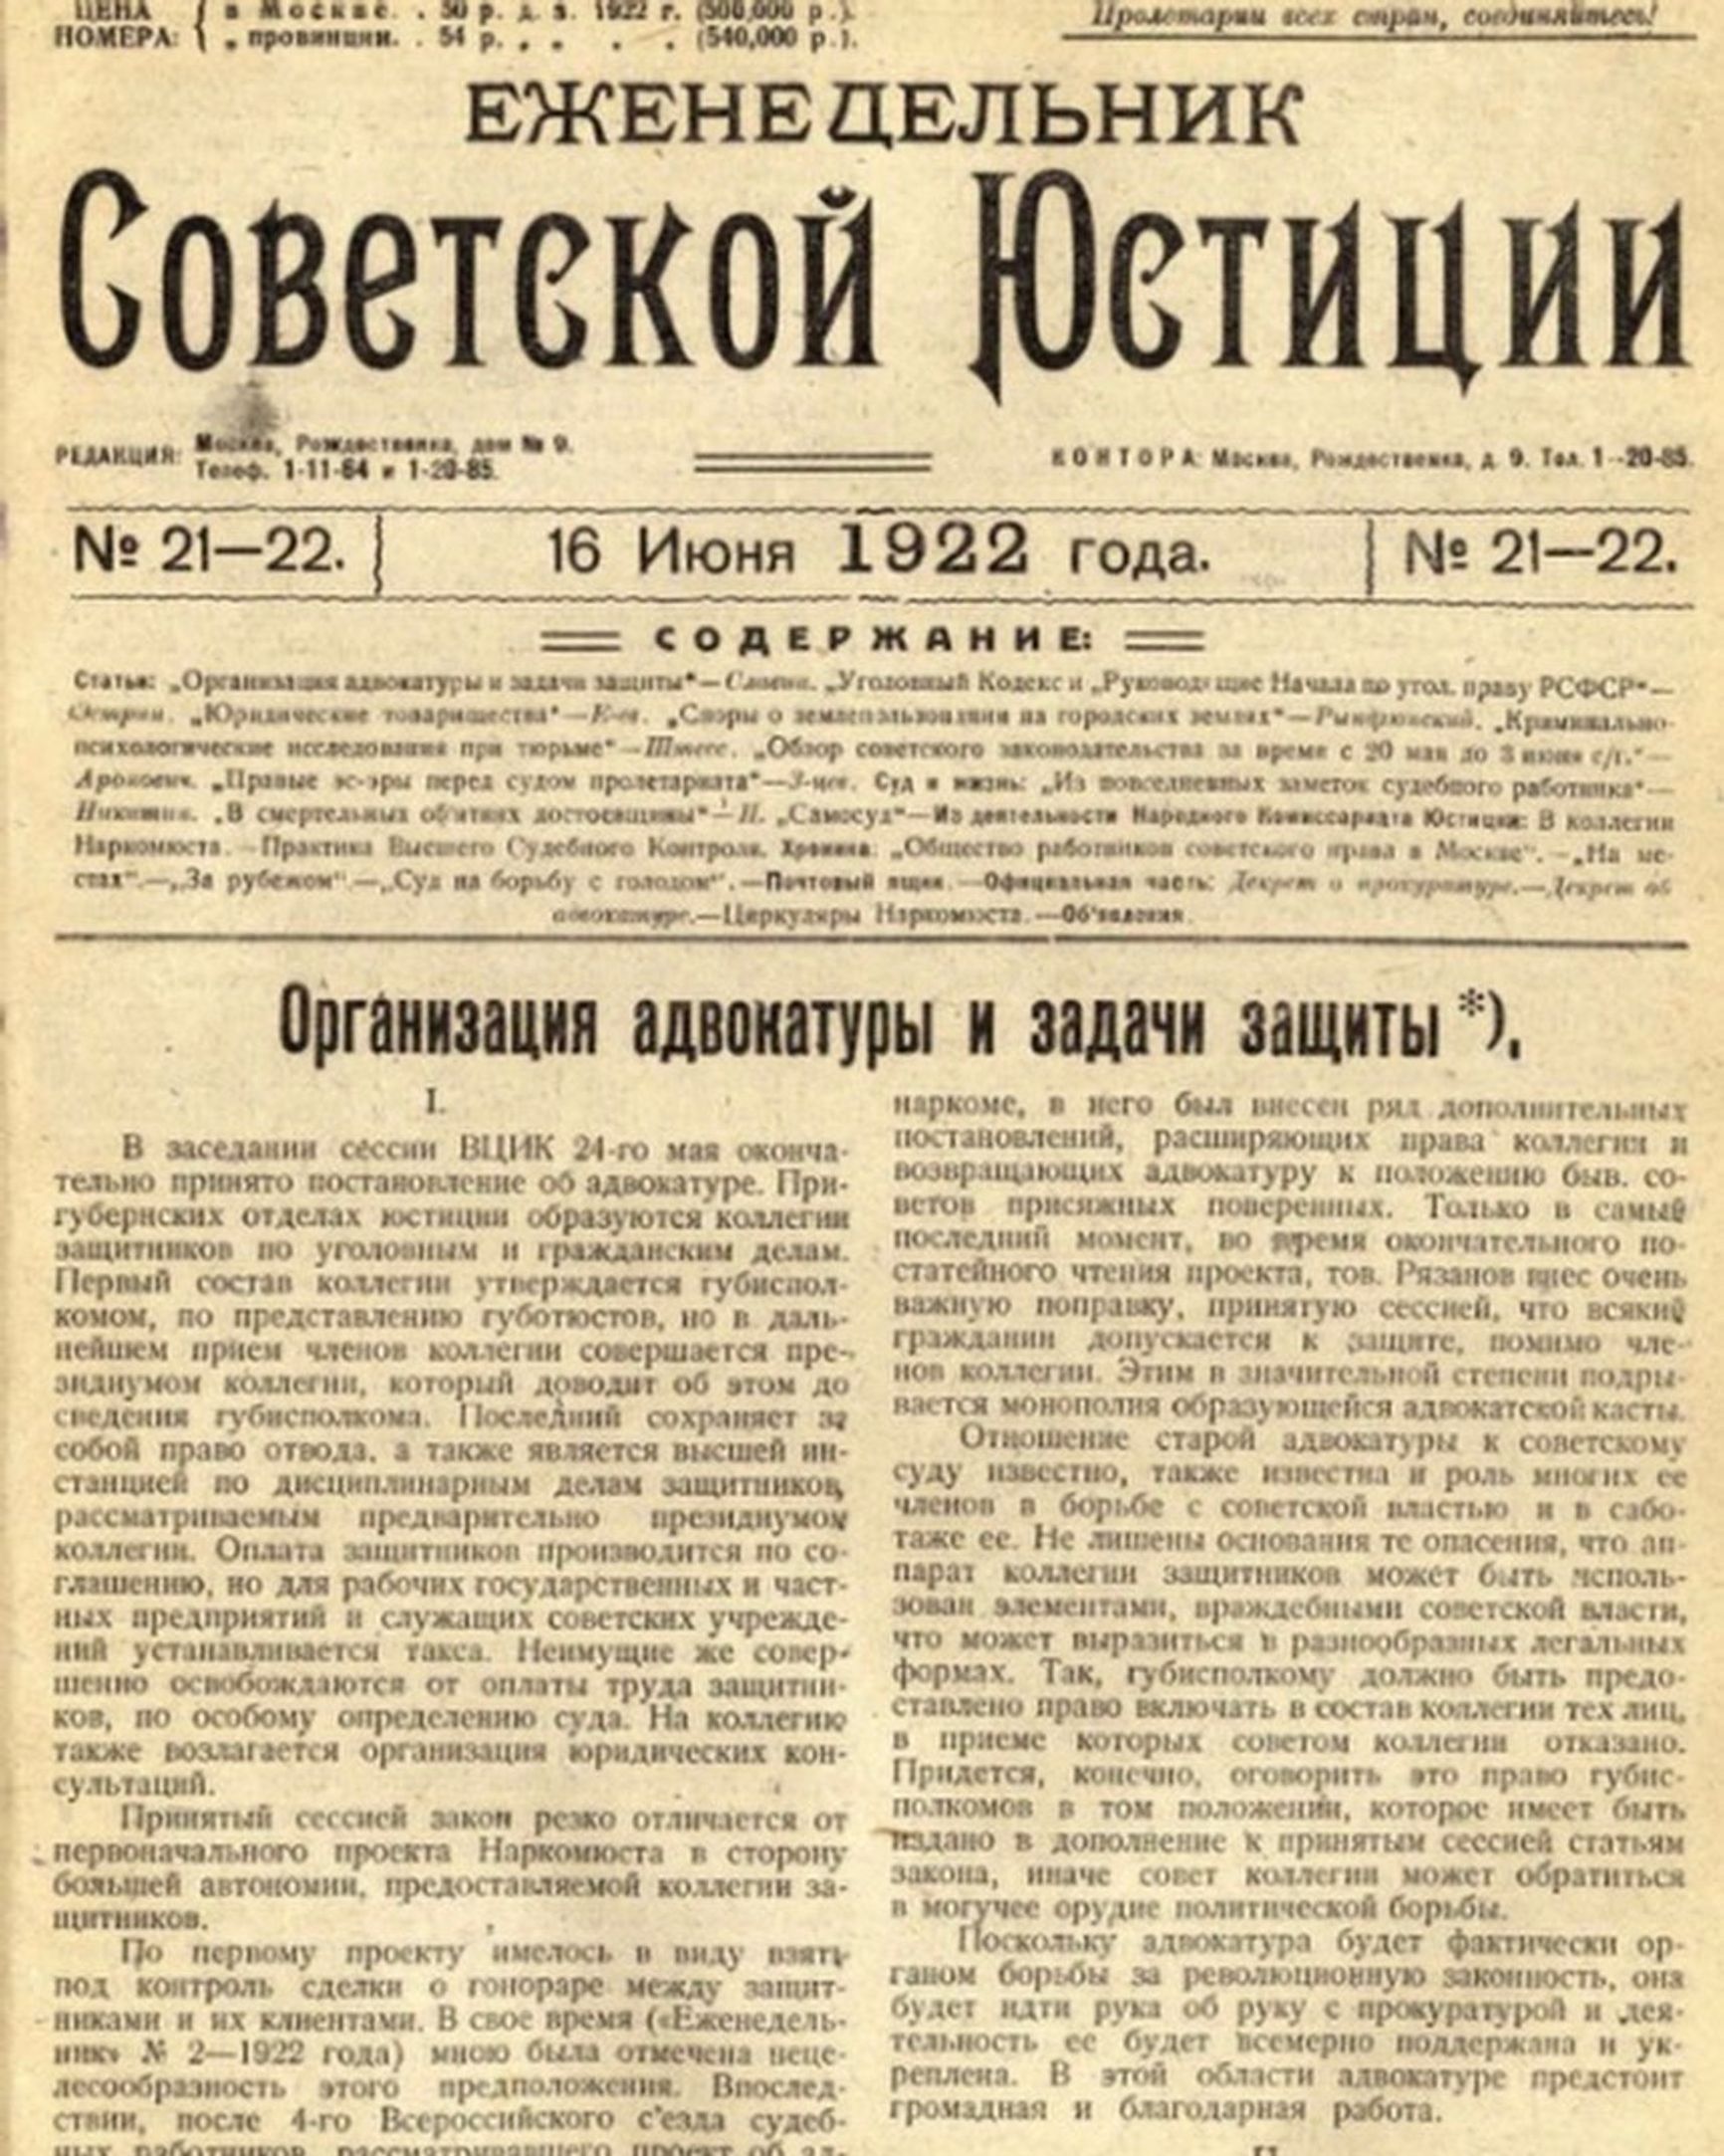 The weekly publication by the Soviet justice system that released the Statute on the Board of Defenders